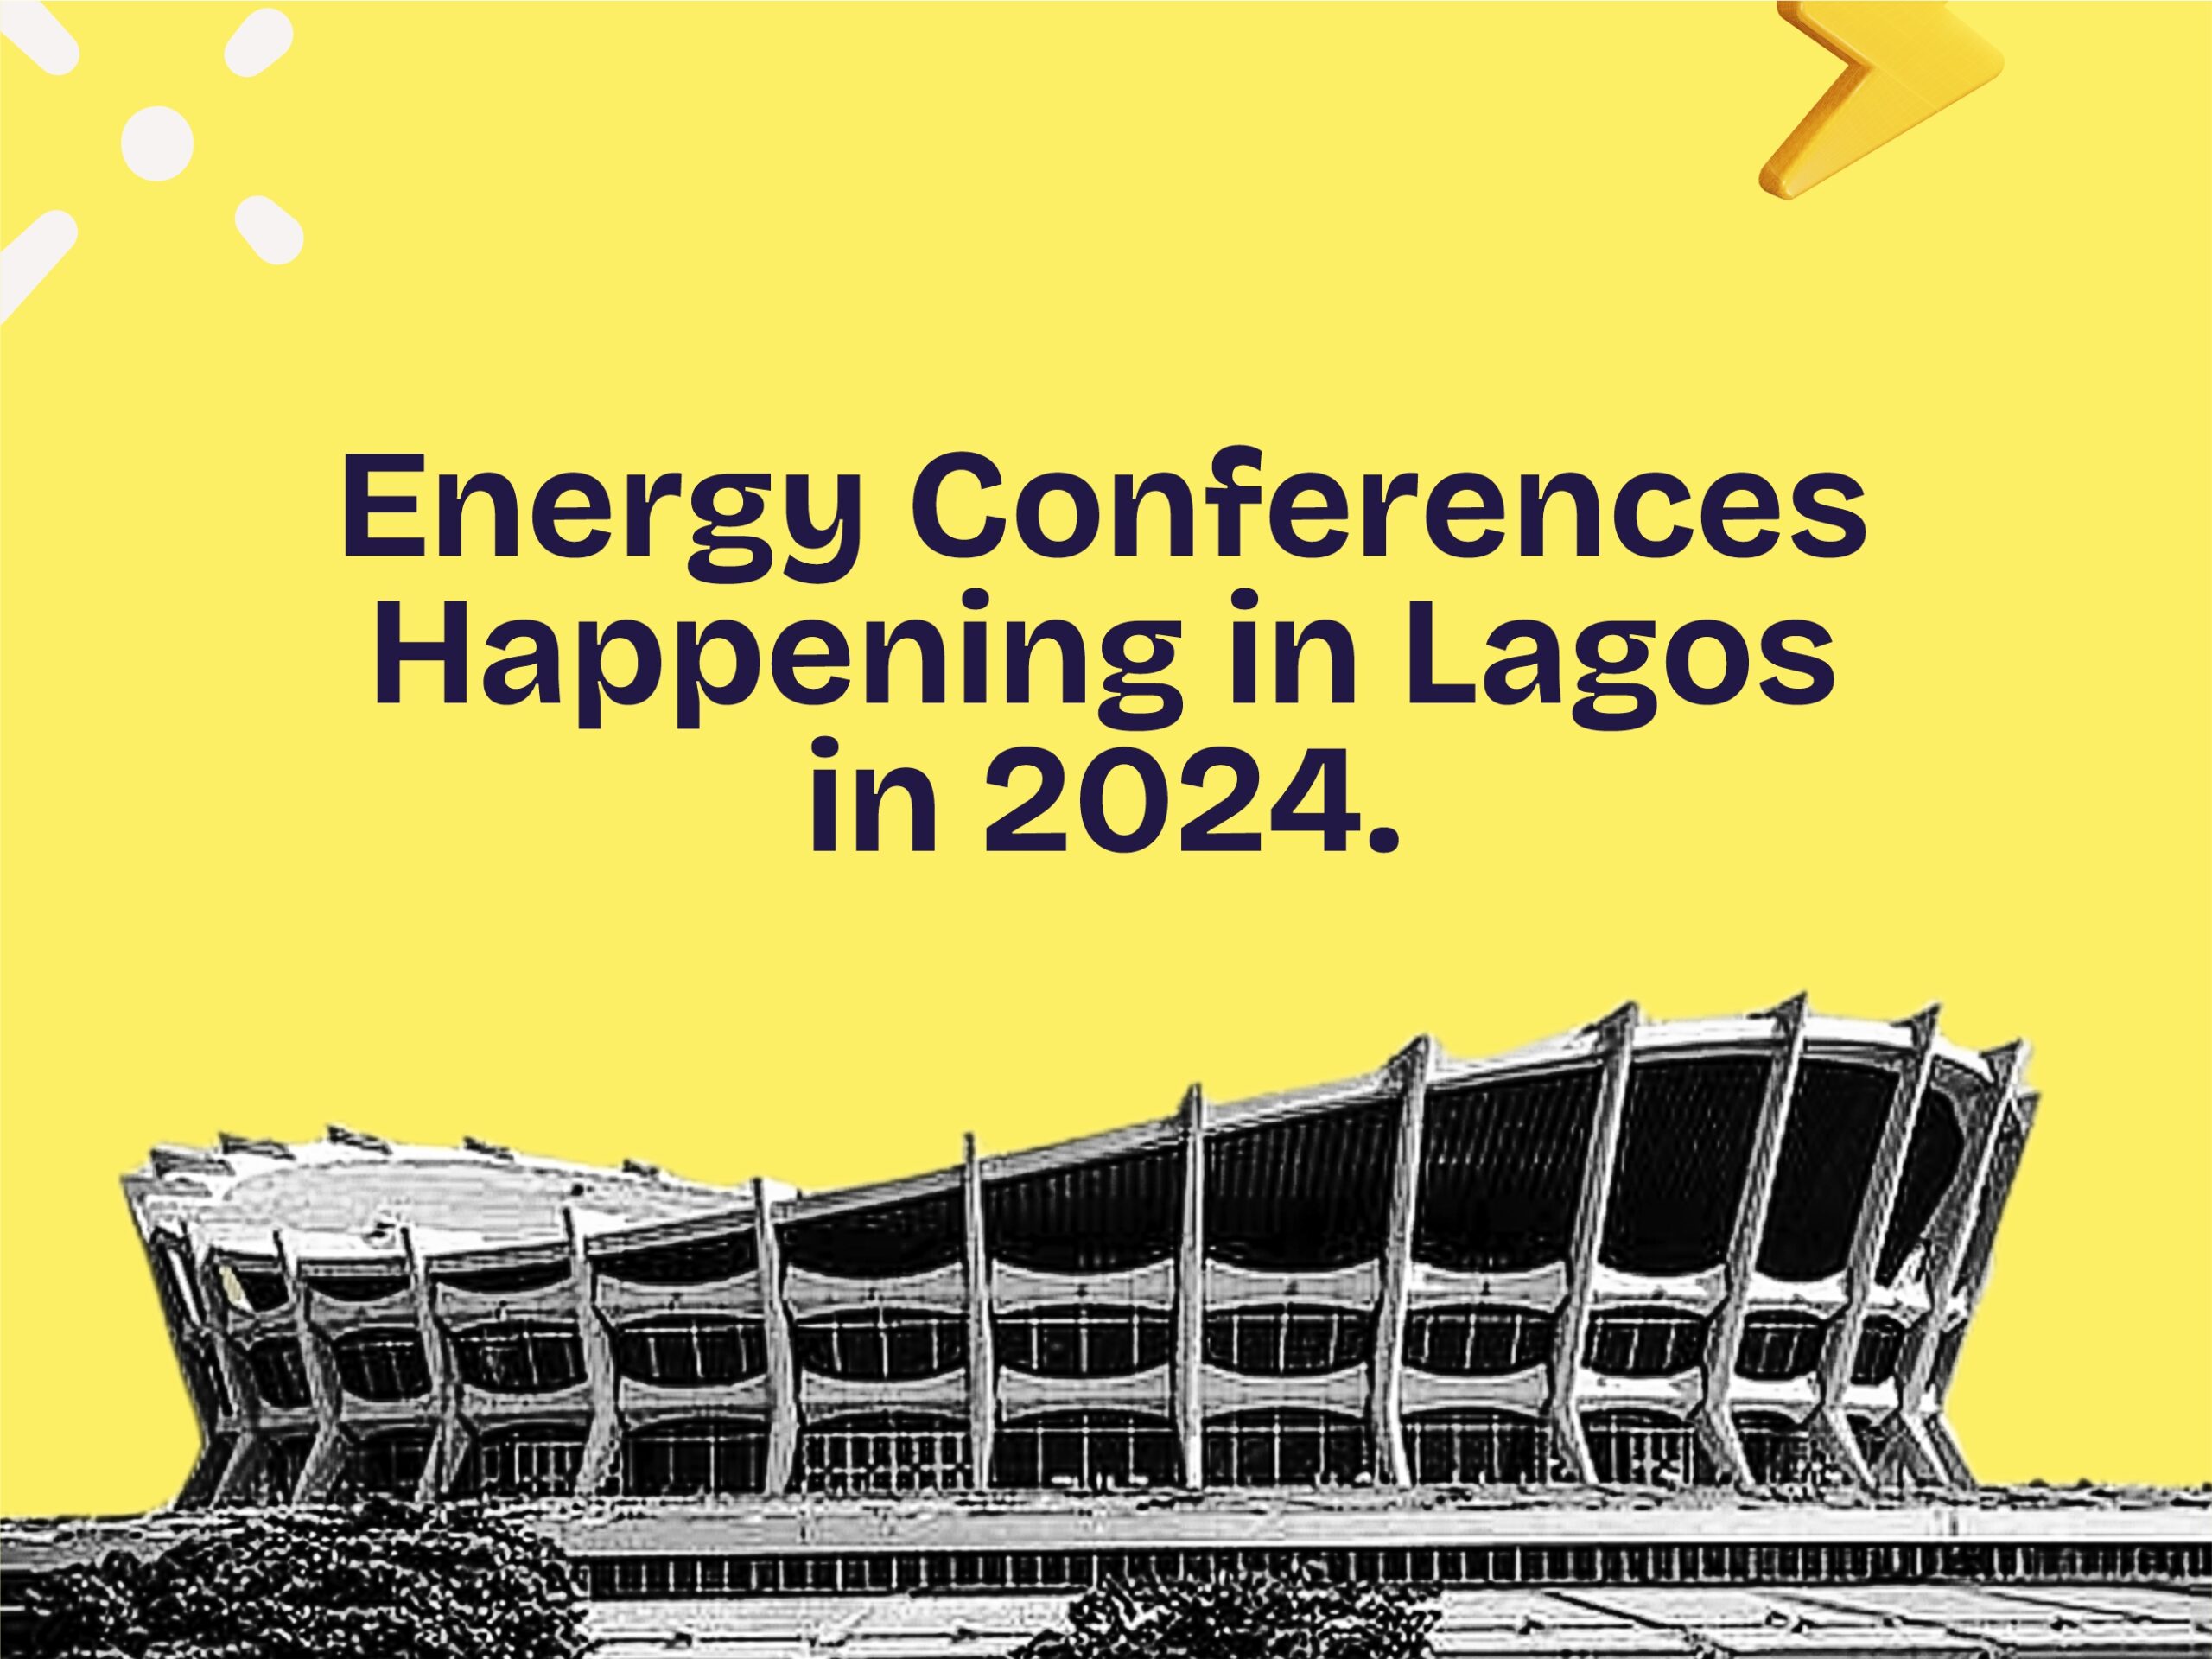 Energy Conferences Happening in Lagos in 2024